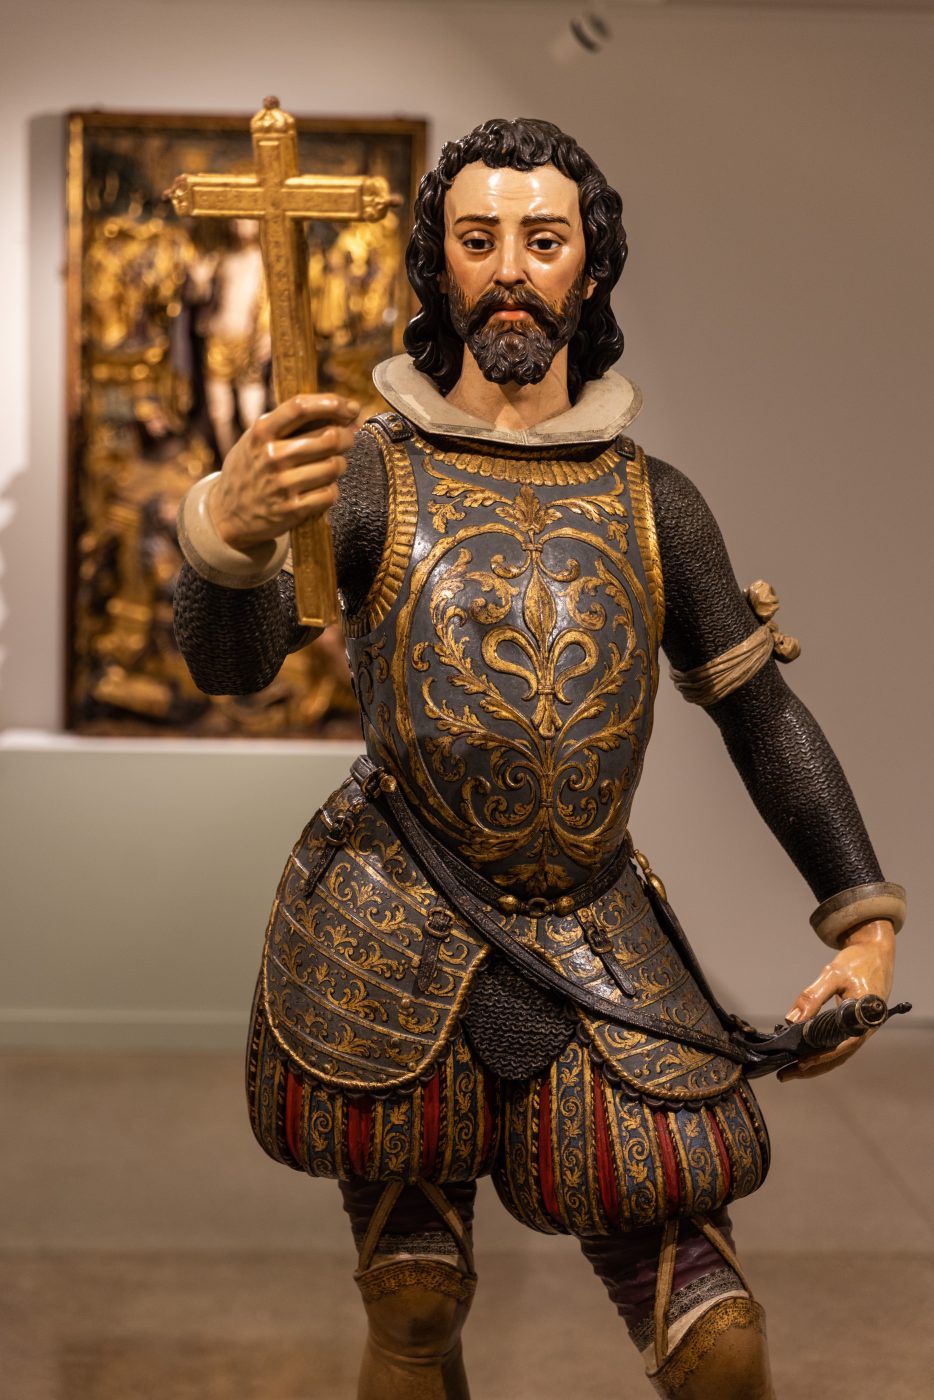 St. Louis of France, made in the early 1600s by Spanish sculptor Juan de Mesa